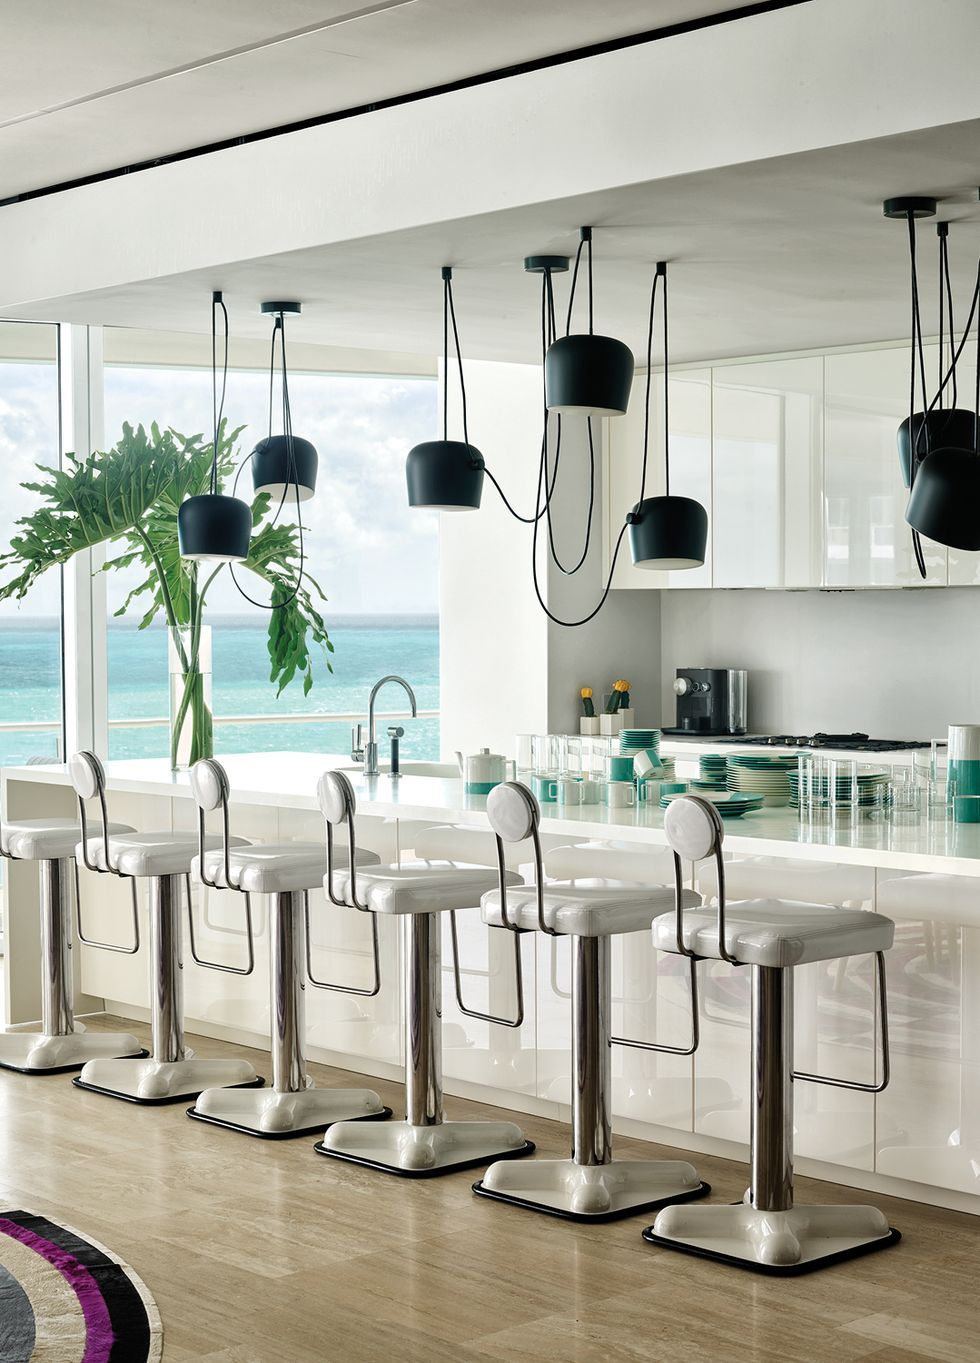 26+ Beautiful Images Of Modern Kitchens